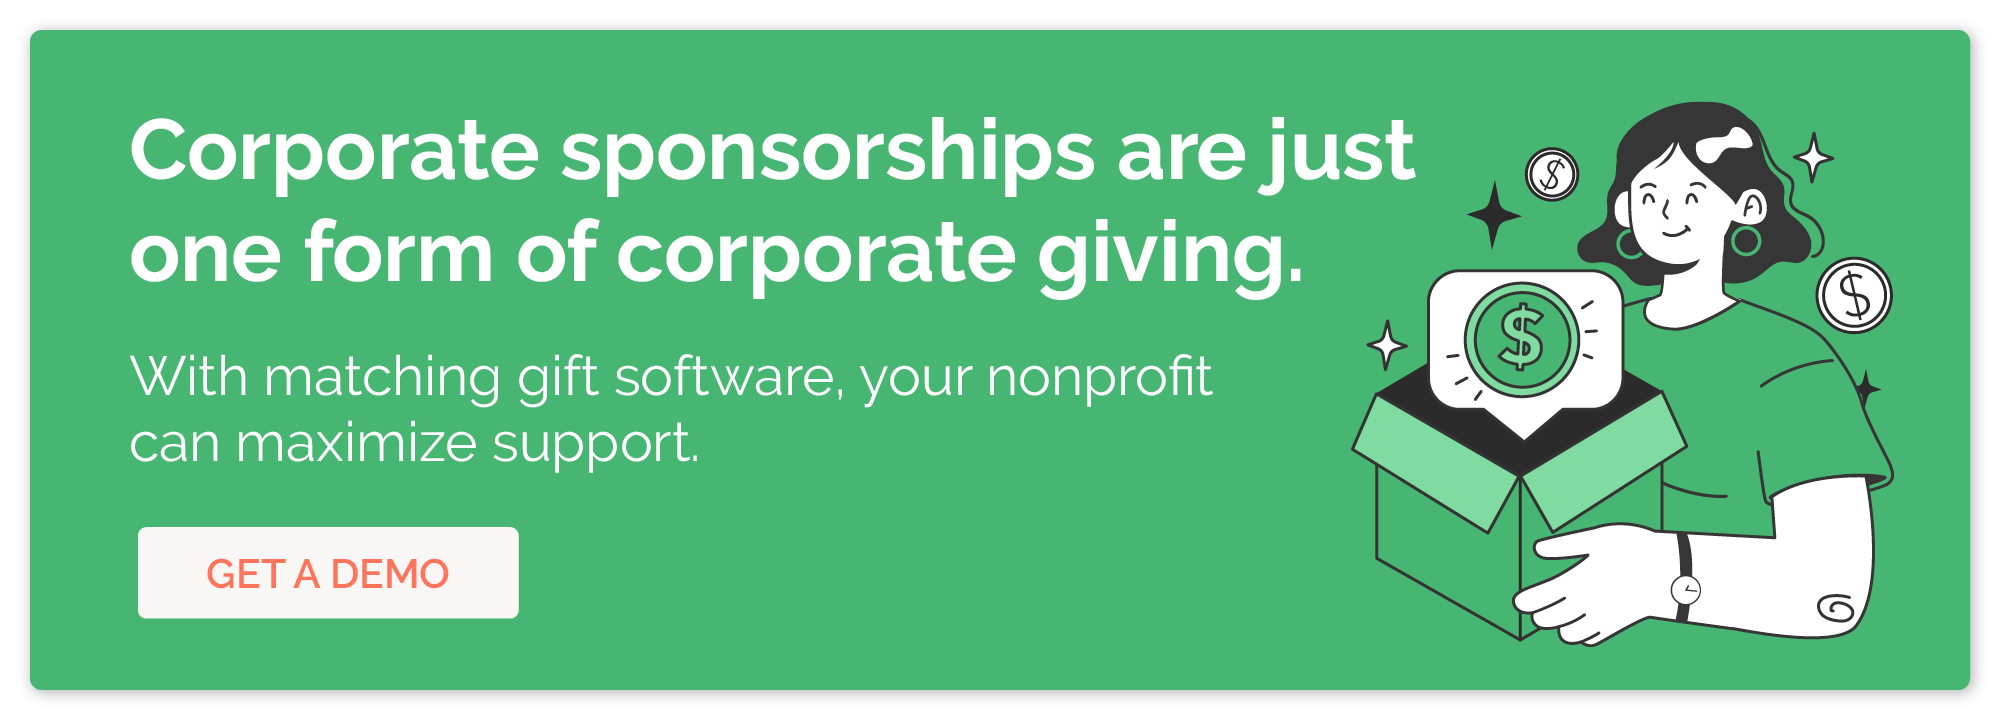 Go beyond corporate sponsorships by encouraging matching gifts with the appropriate software.